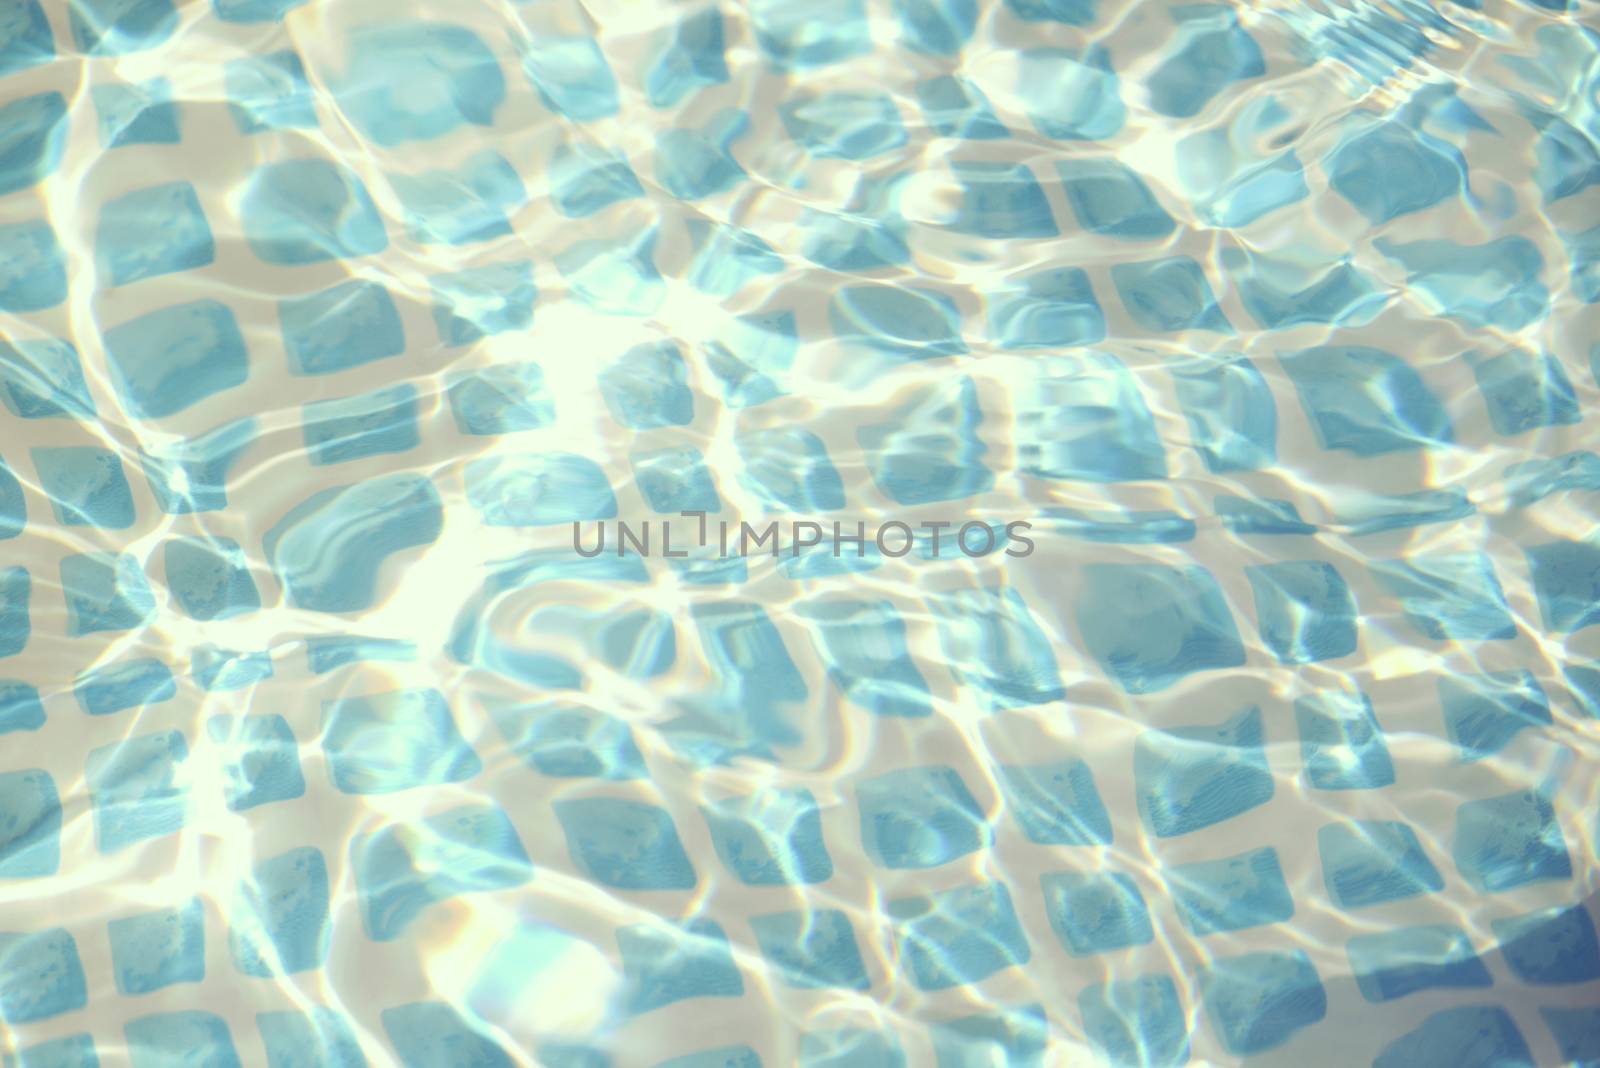 Retro swimming pool rippled summer water texture. Vintage soft color hipster style.